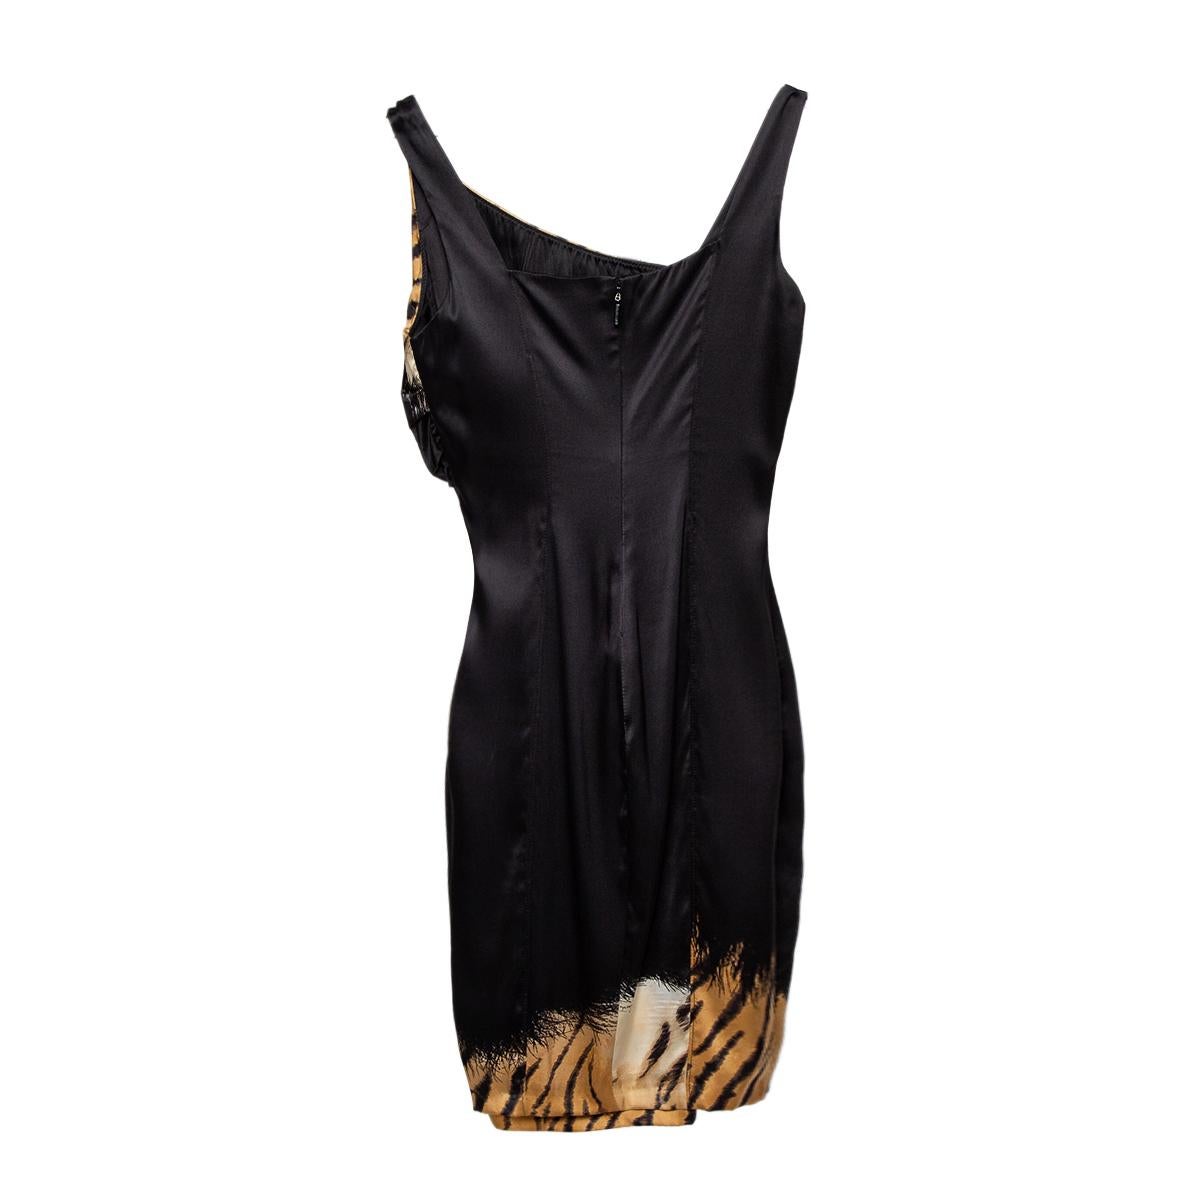 Sensuous and bold are two words that pretty much define this Roberto Cavalli dress. It is a beautiful creation cut from quality satin silk fabric. The dress features a draped design, a sleeveless silhouette, and animal-printed panels.

